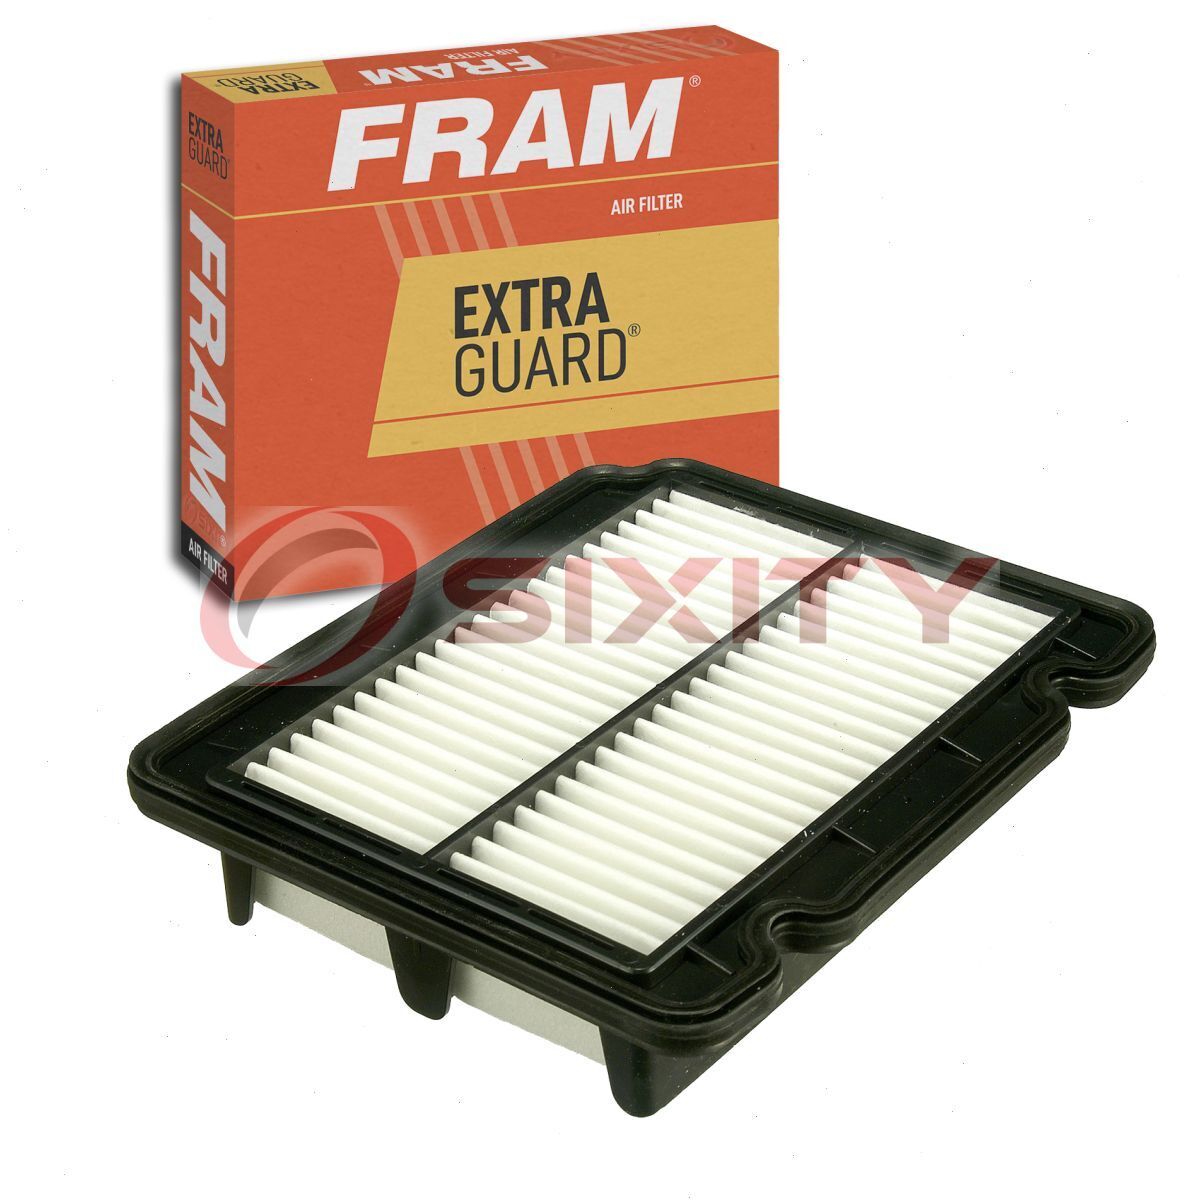 FRAM Extra Guard Air Filter for 2006-2011 Chevrolet Aveo5 Intake Inlet sb